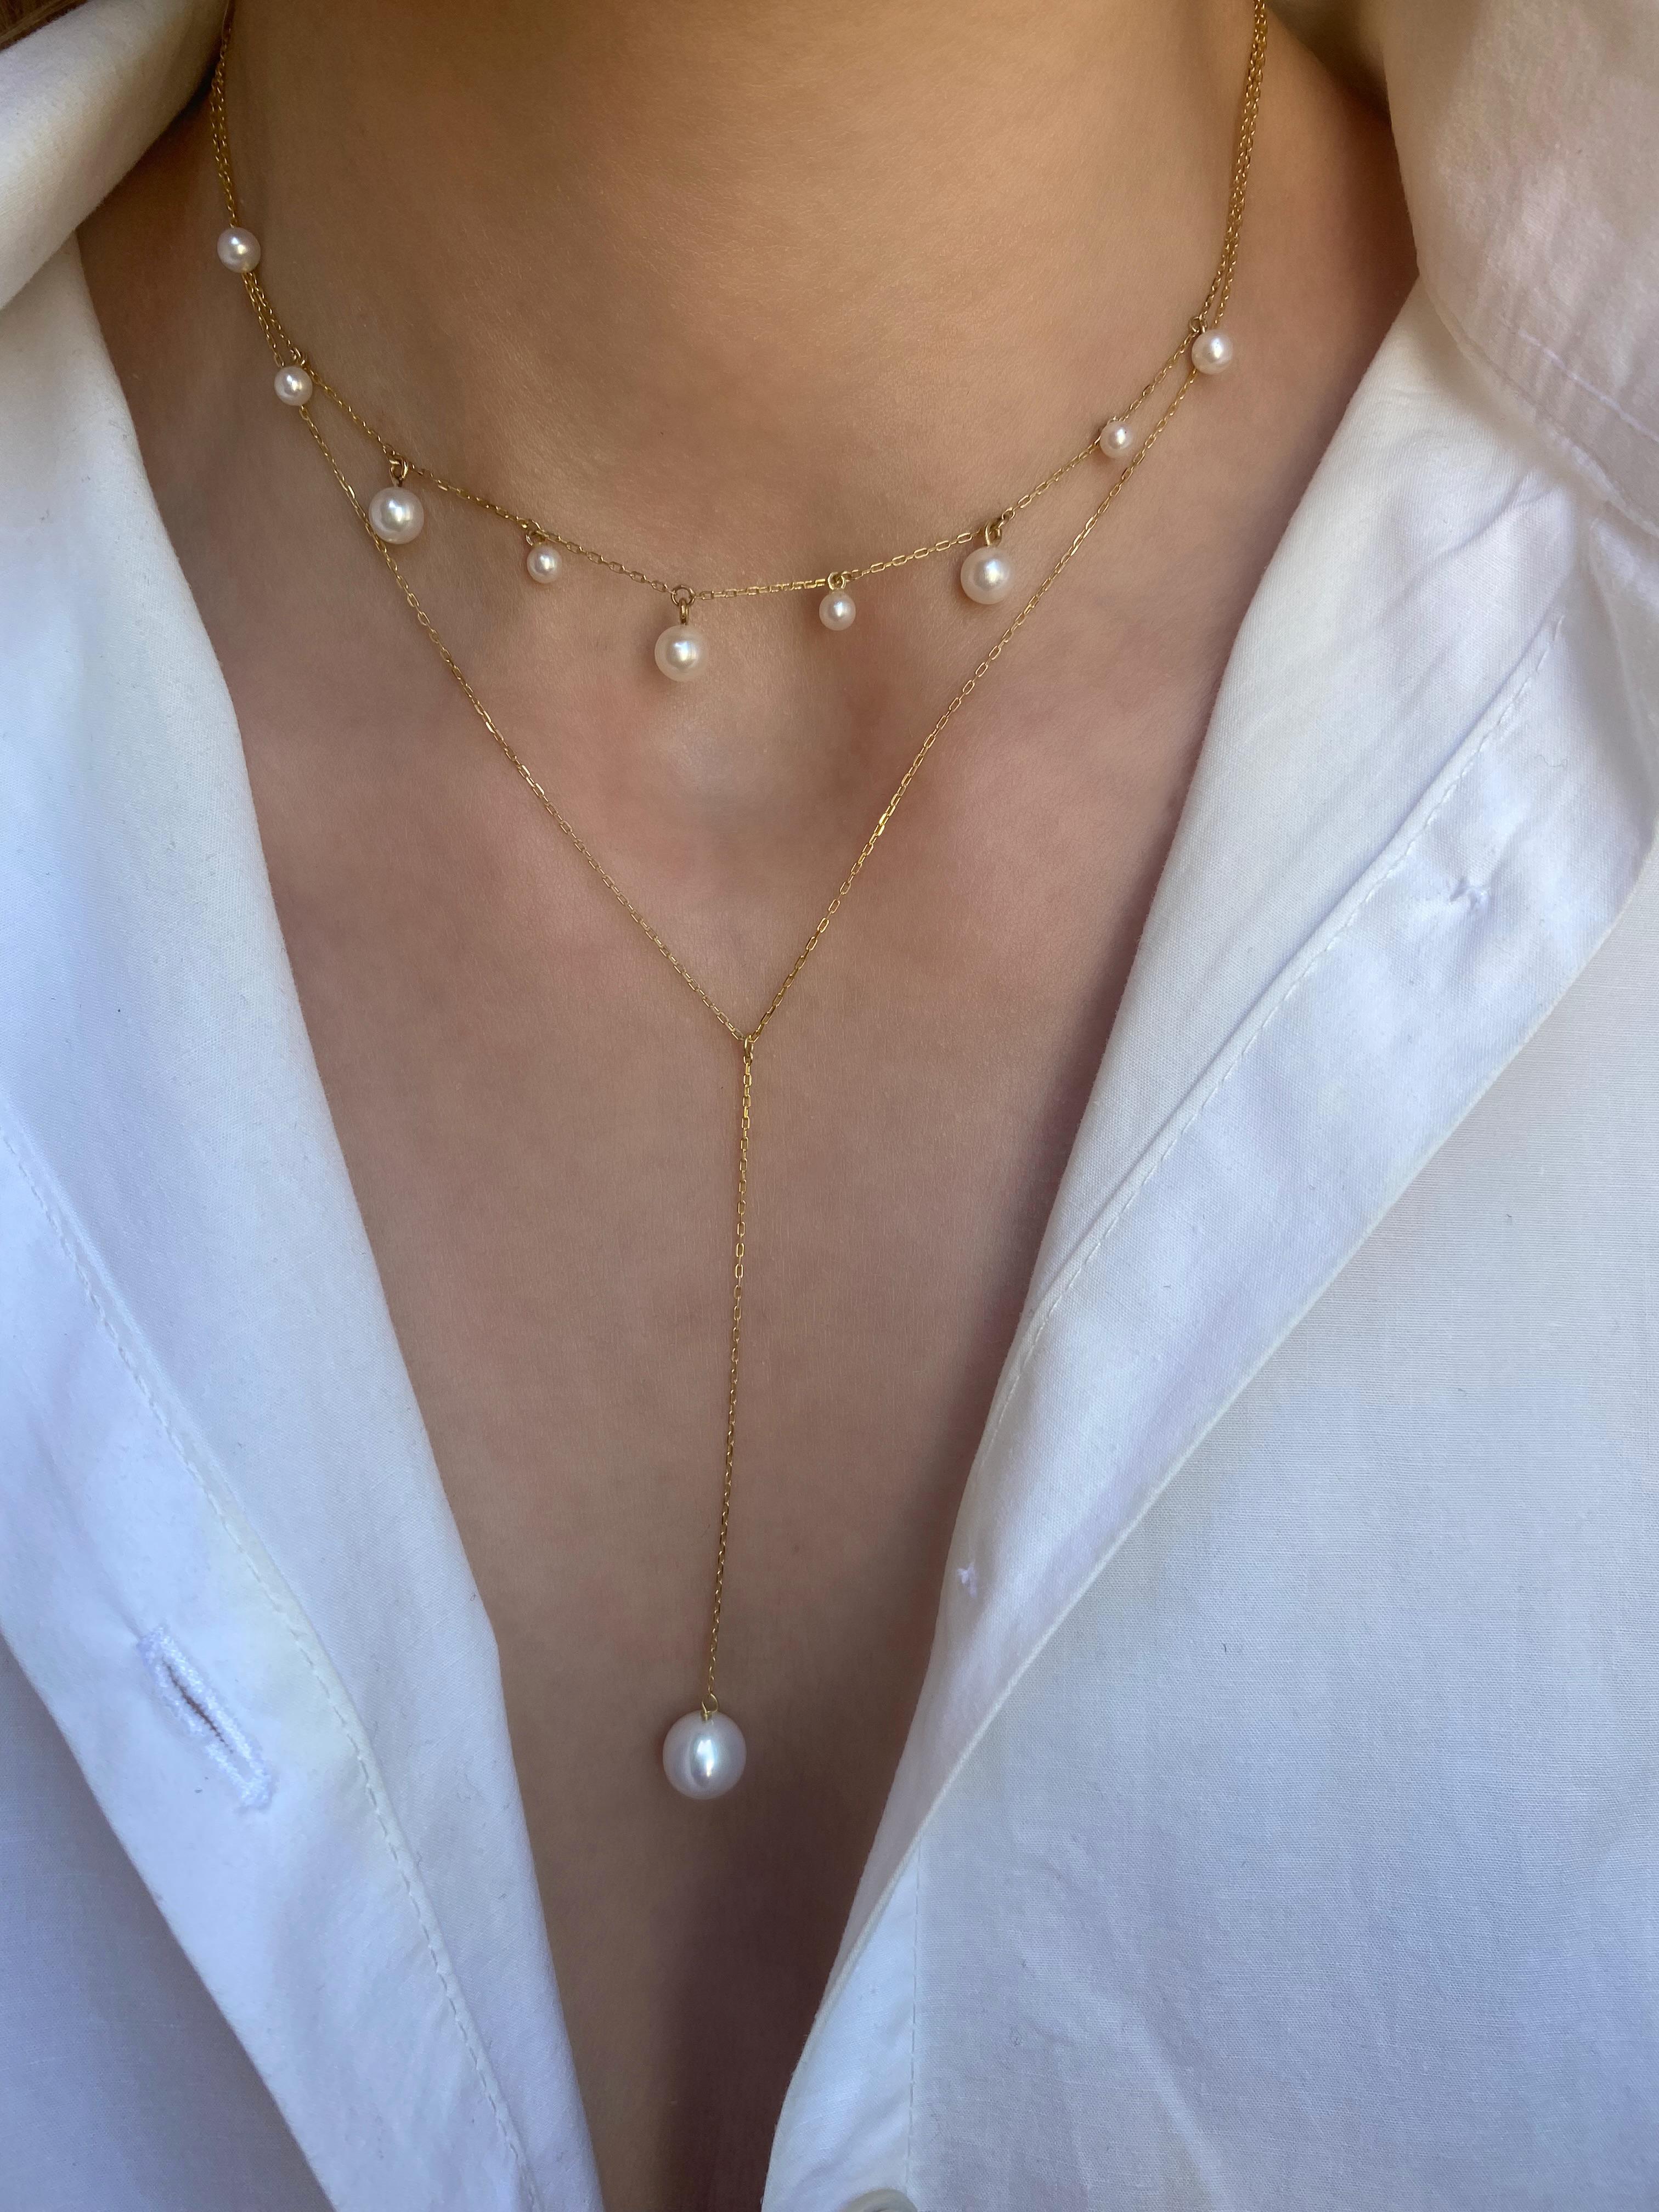 Pearl Chain Choker Necklace In New Condition For Sale In Nicosia, CY